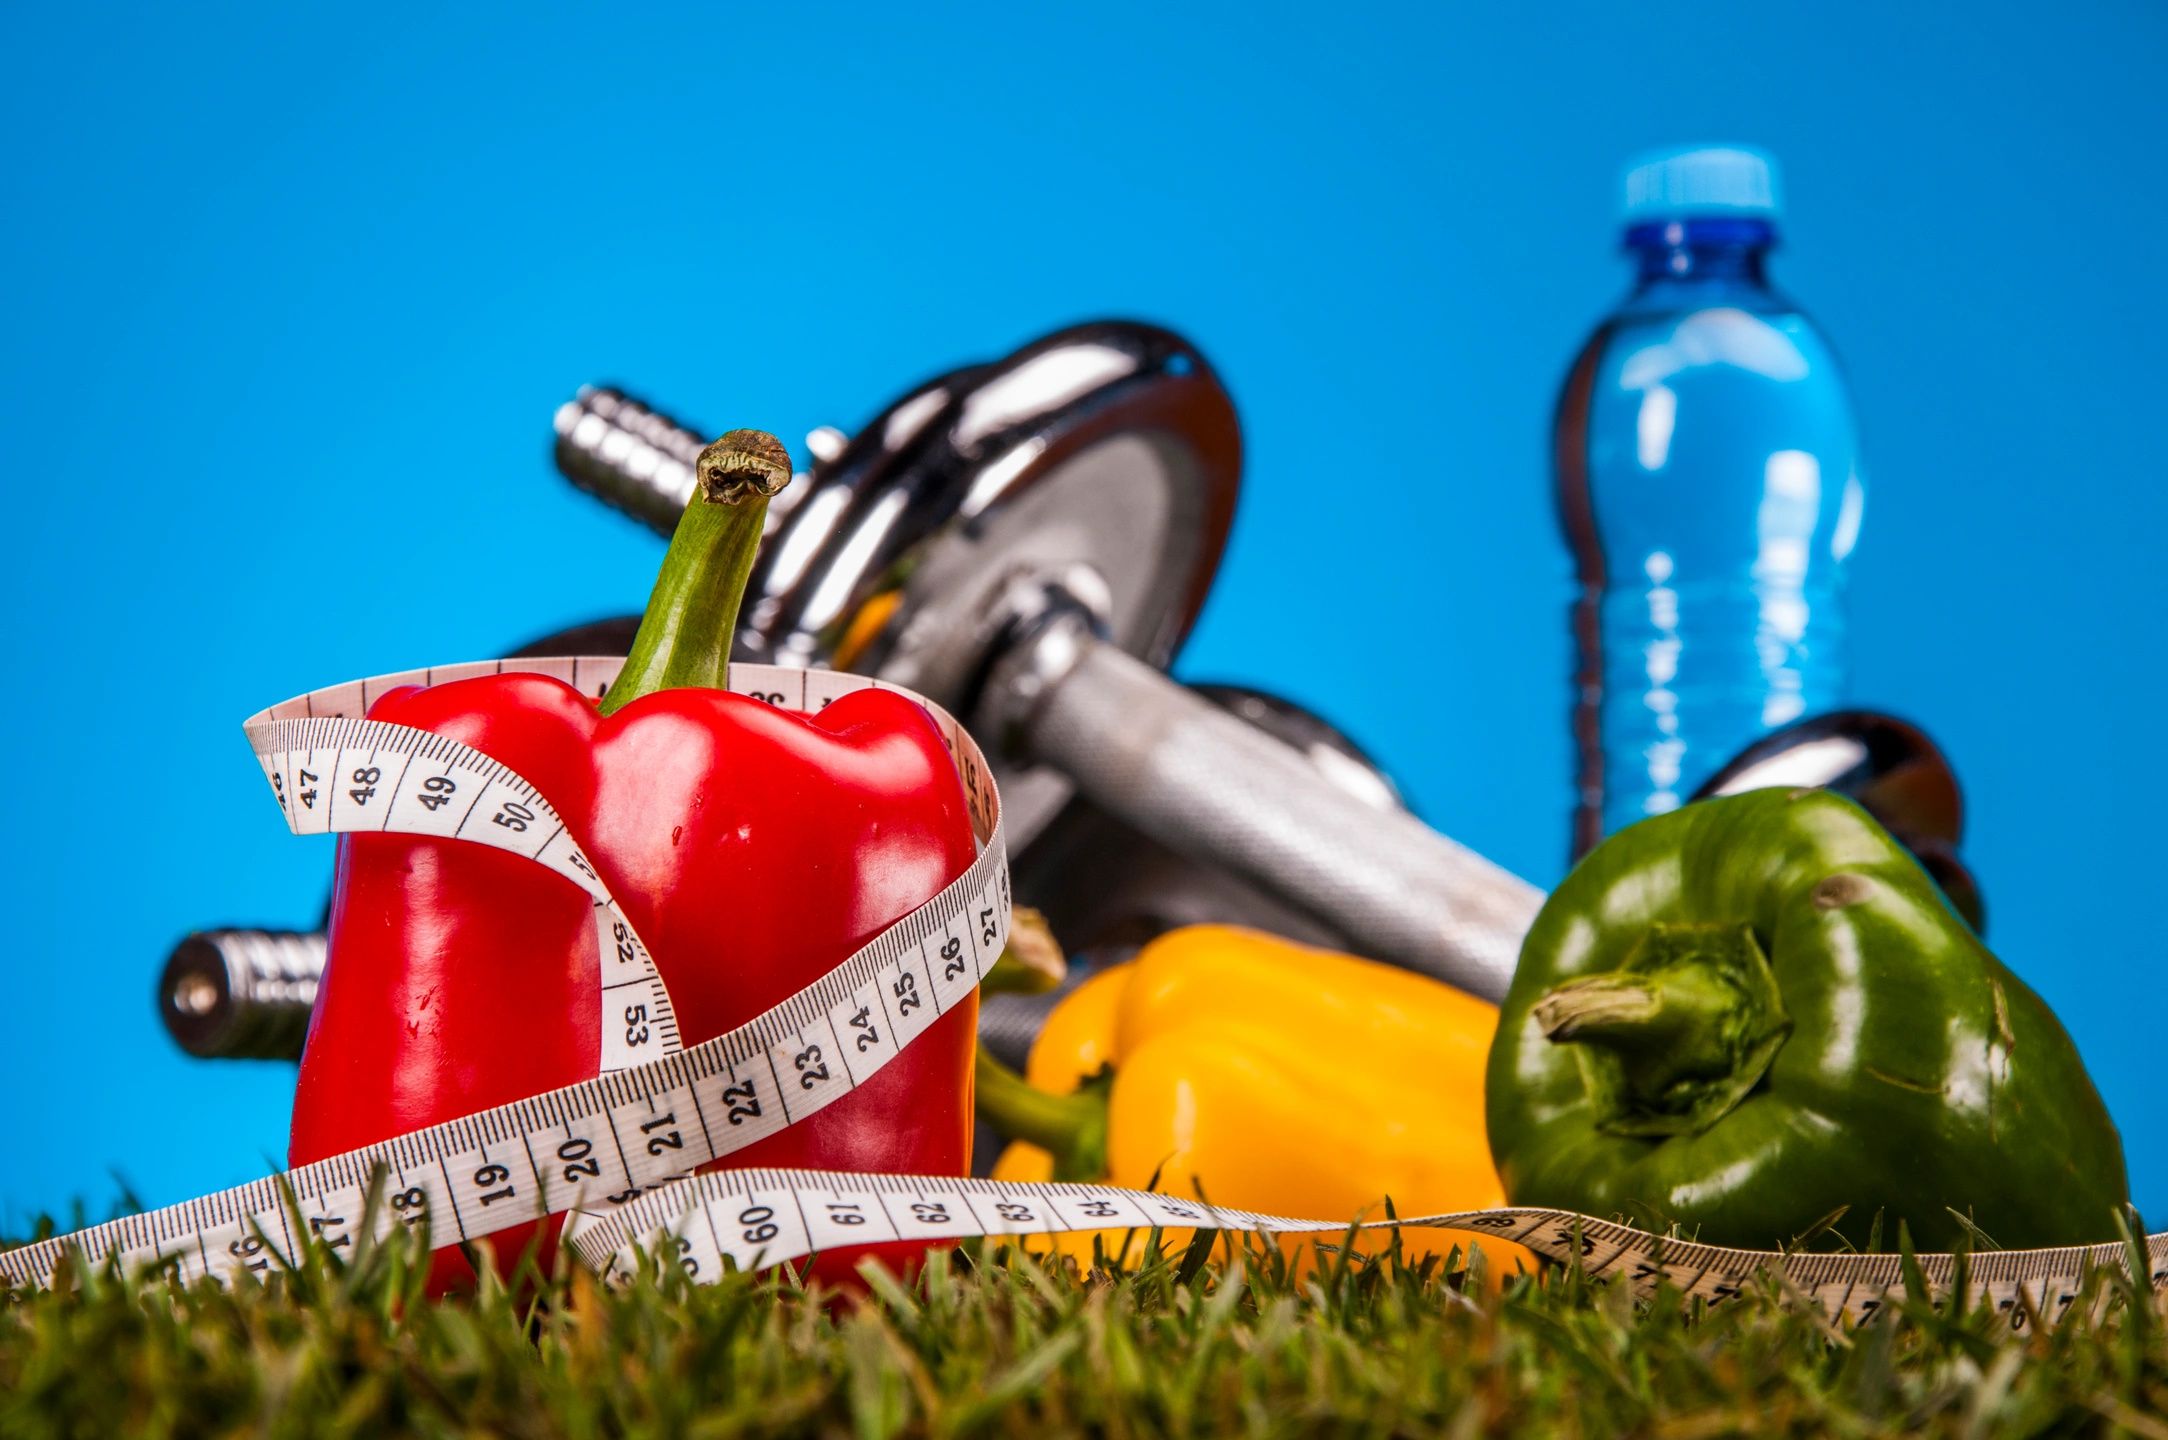 Reach your fitness goals with proper nutrition and a customized training program.